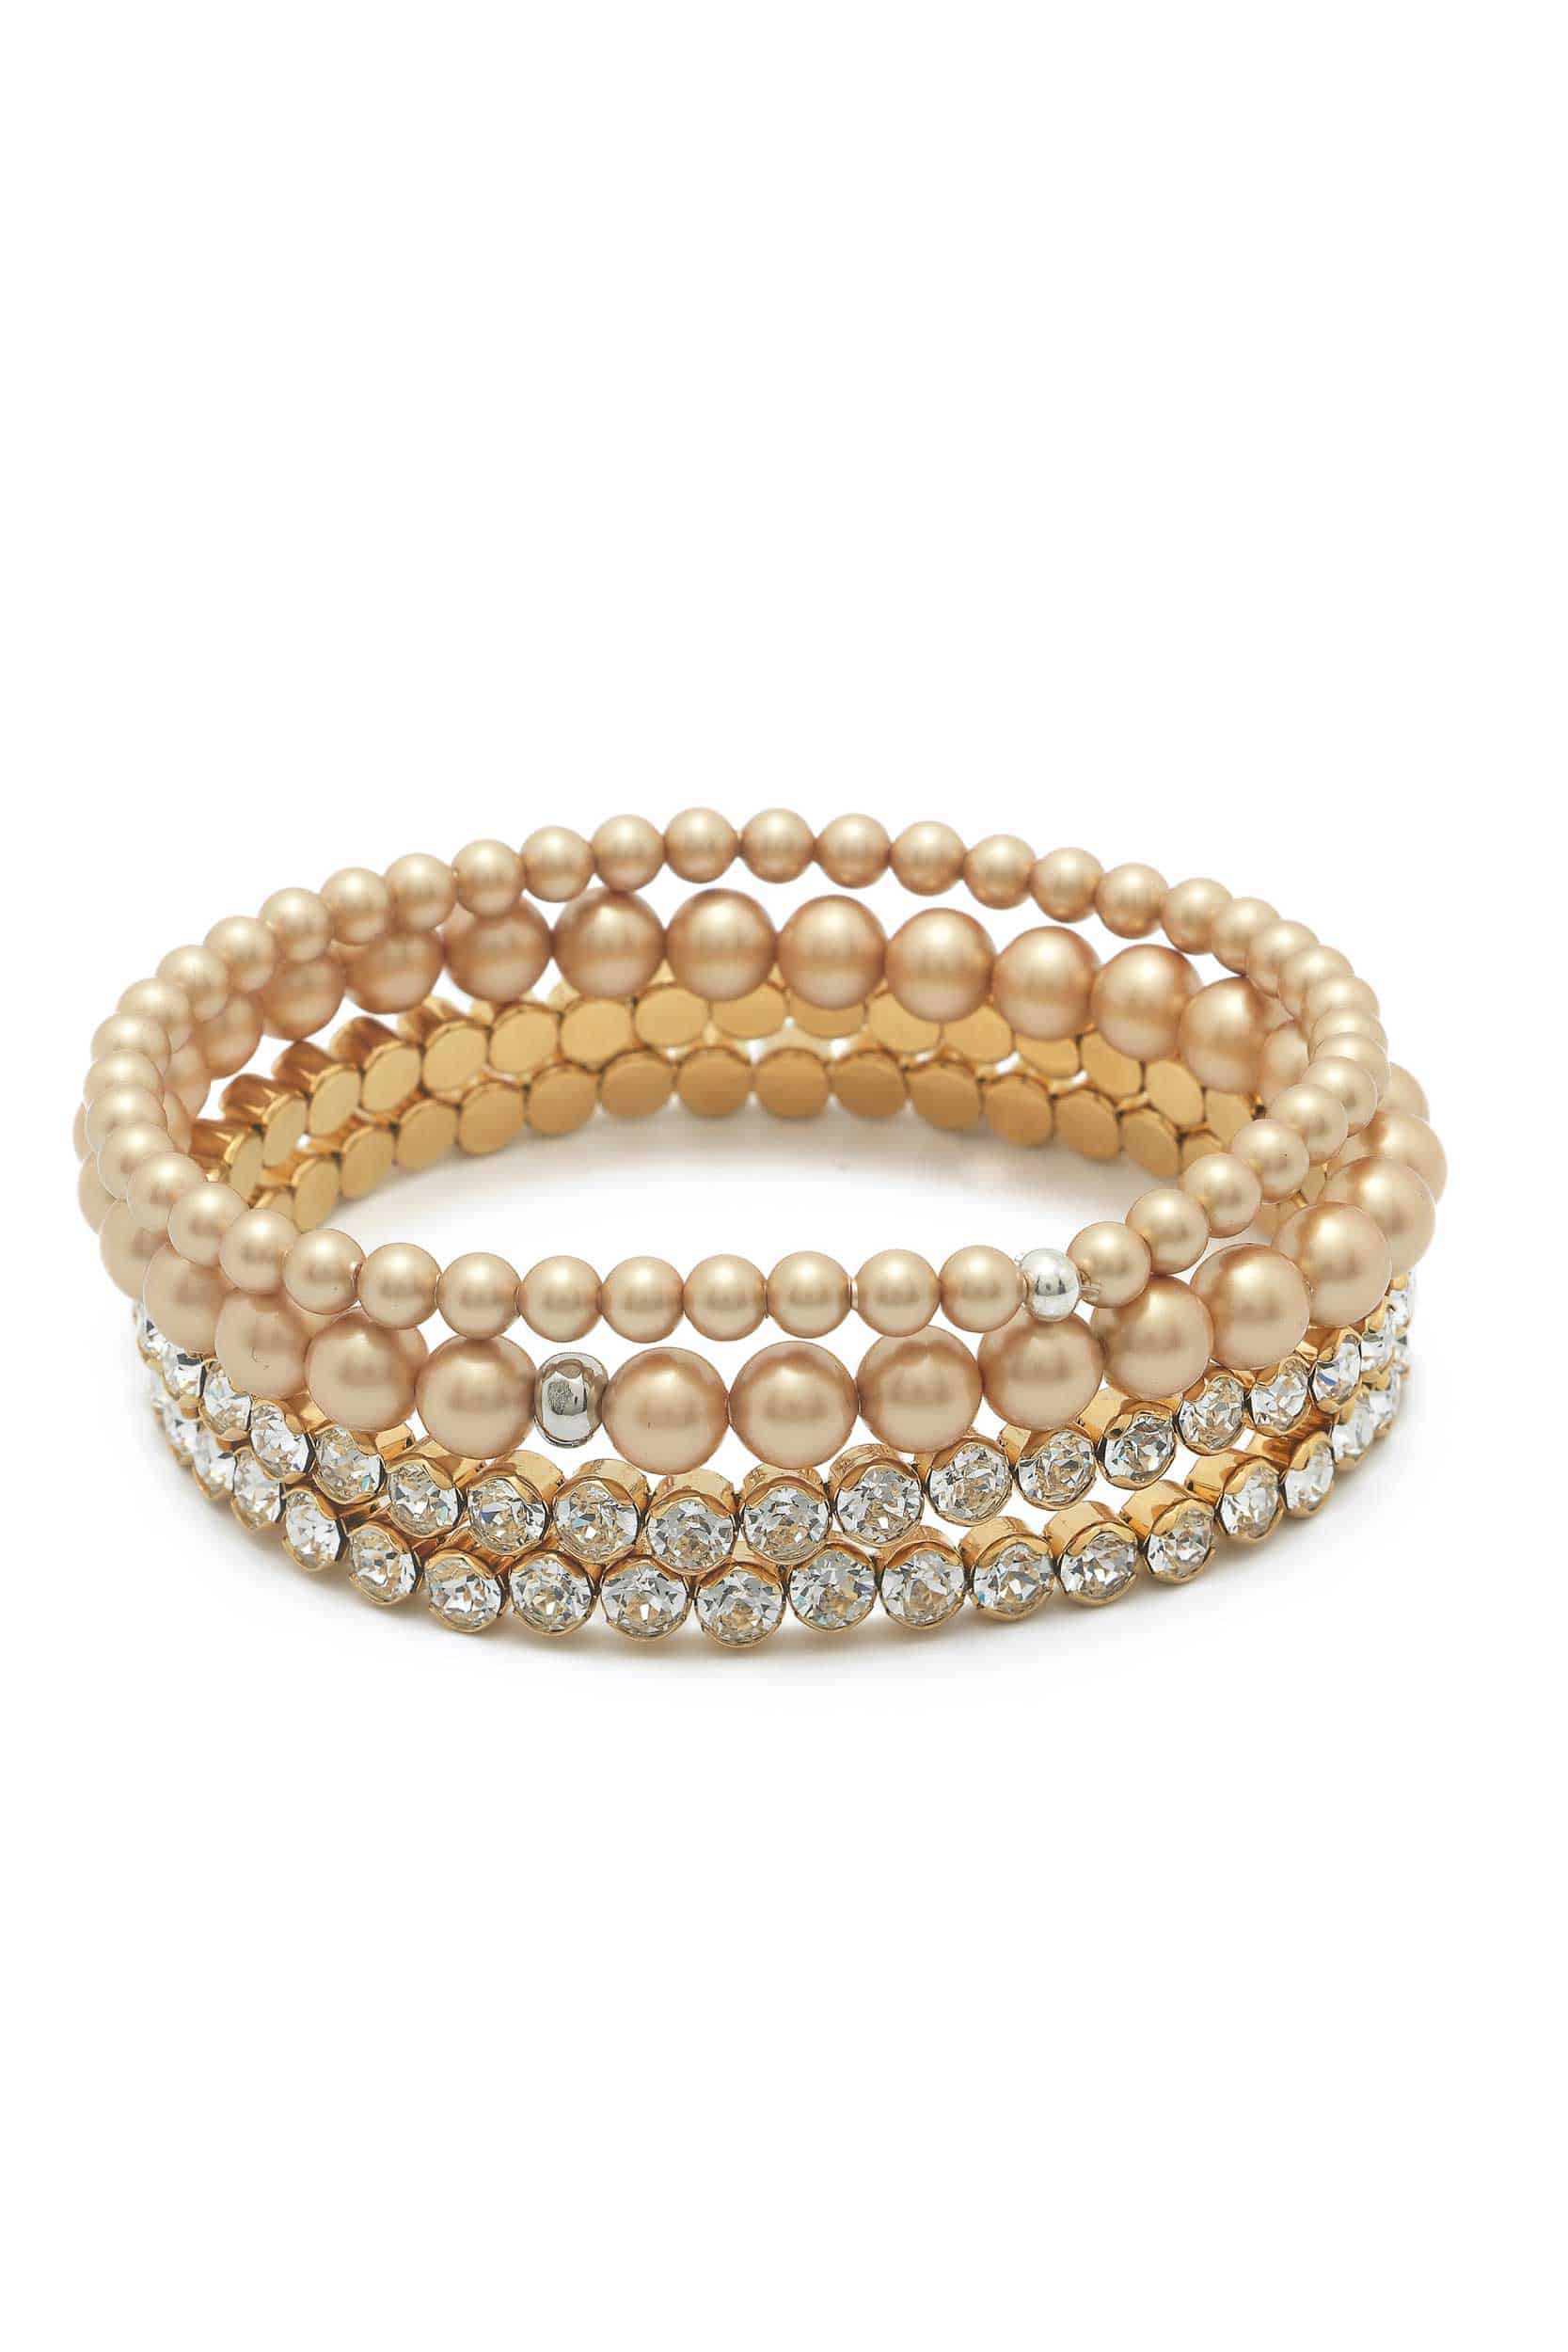 Featured image for “Abrazi Armband | 651-GOLD”